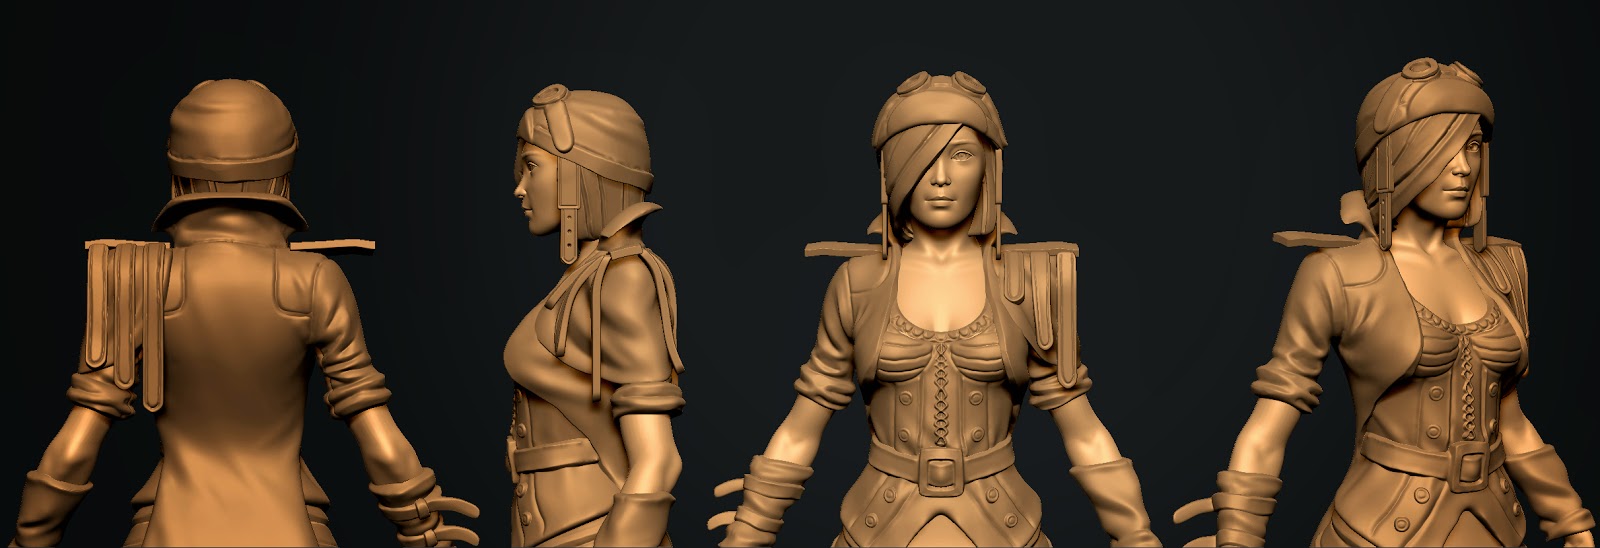 fiora%2Bfinished%2Bsculpt%2Bclose%2Bup.jpg